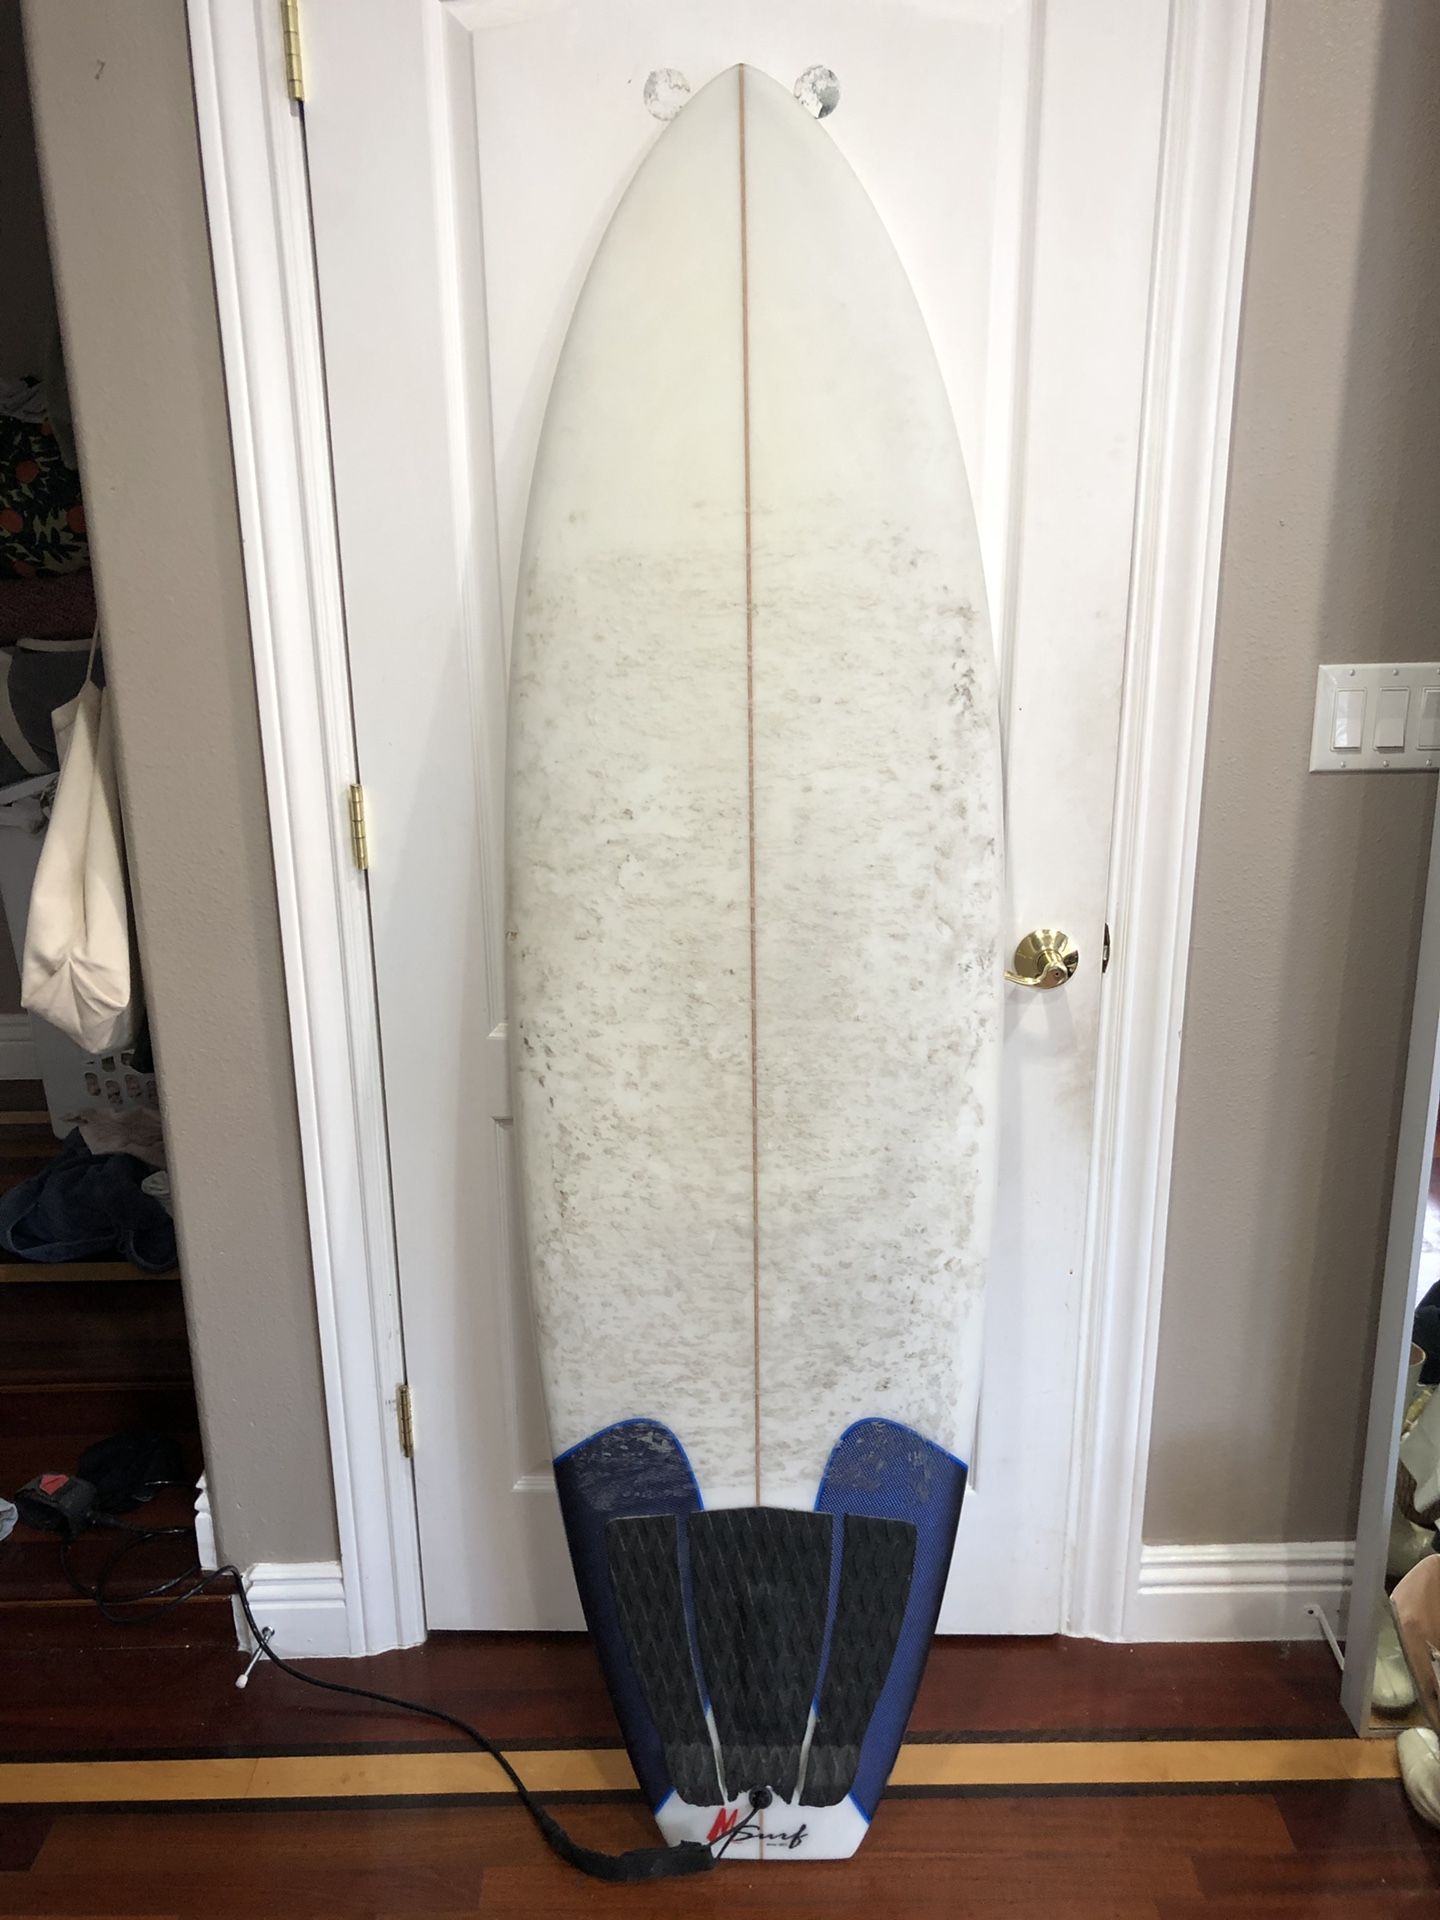 SURFBOARD FOR SALE